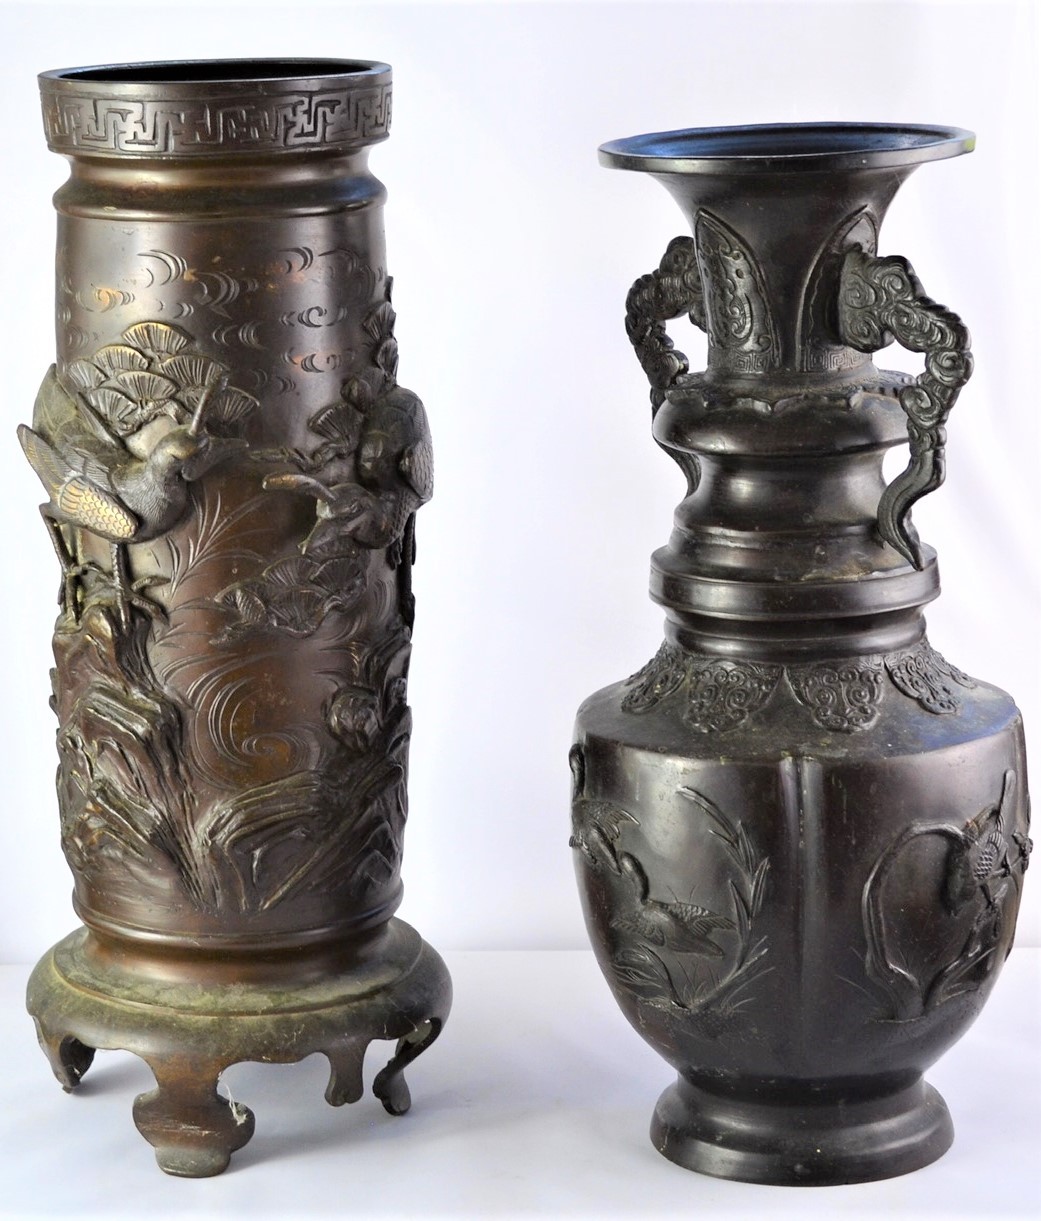 Japanese Meiji period bronze twin handled vase, with relief decoration of birds in trees, 37 cm - Image 2 of 9